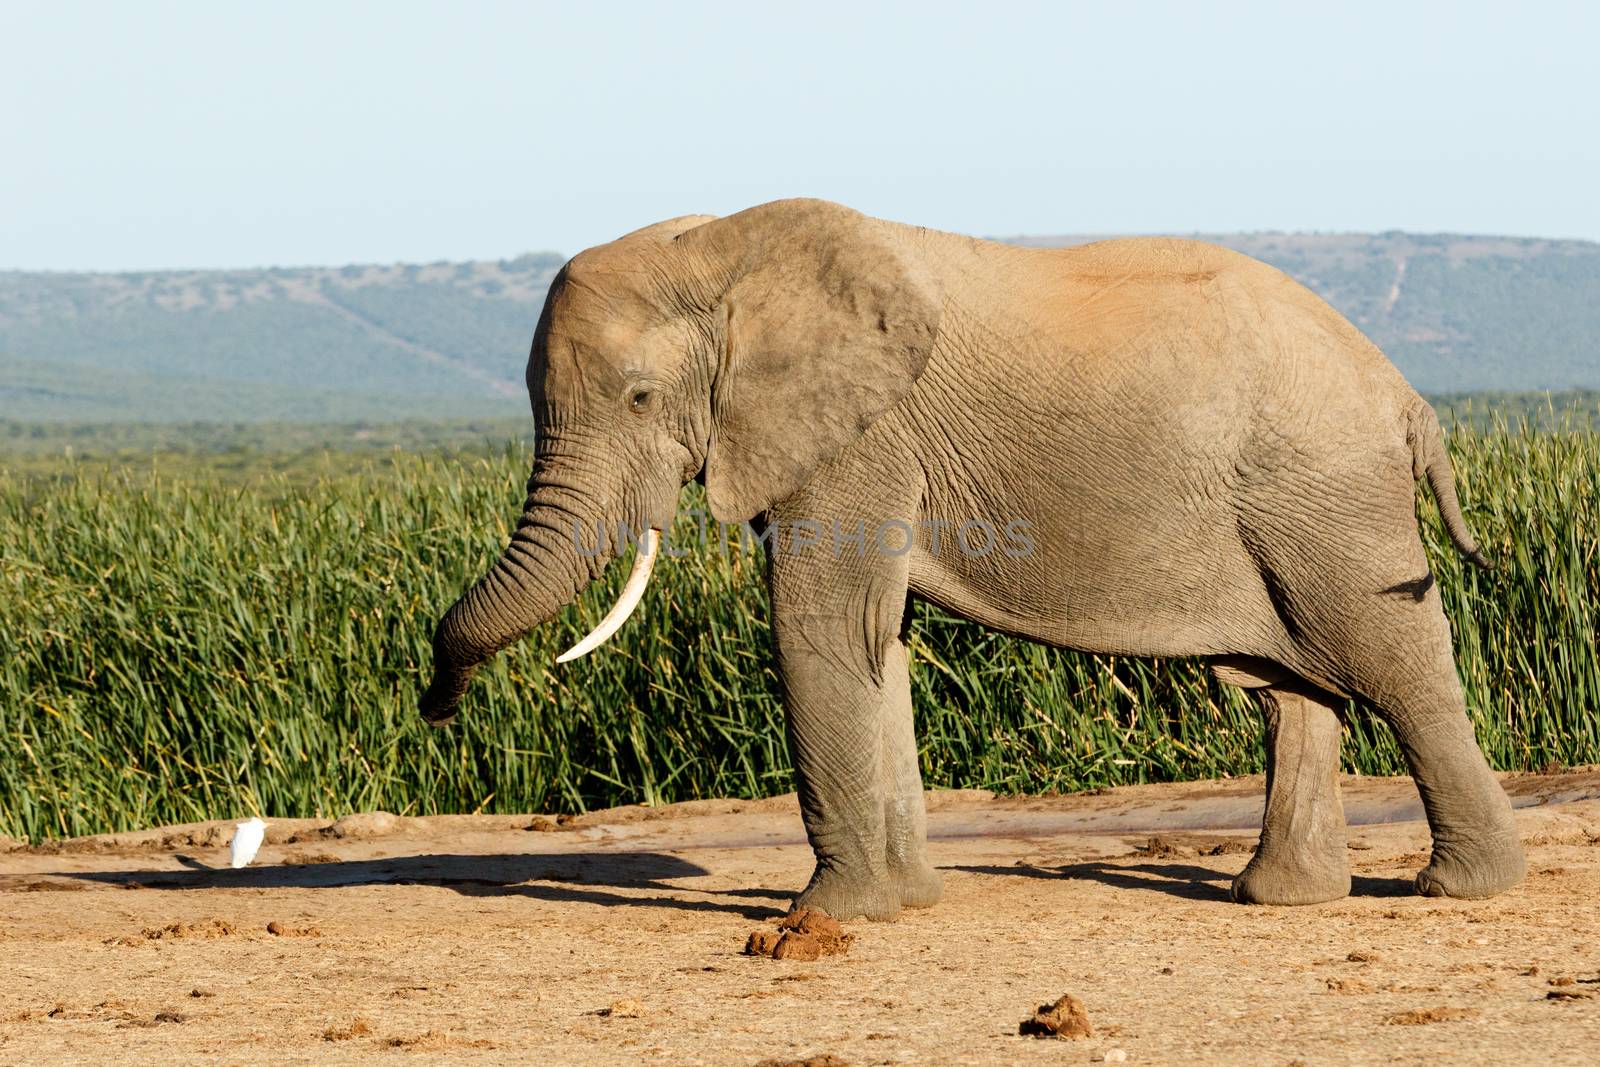 WoW Huge African Bush Elephant - The African bush elephant is the larger of the two species of African elephant. Both it and the African forest elephant have in the past been classified as a single species.